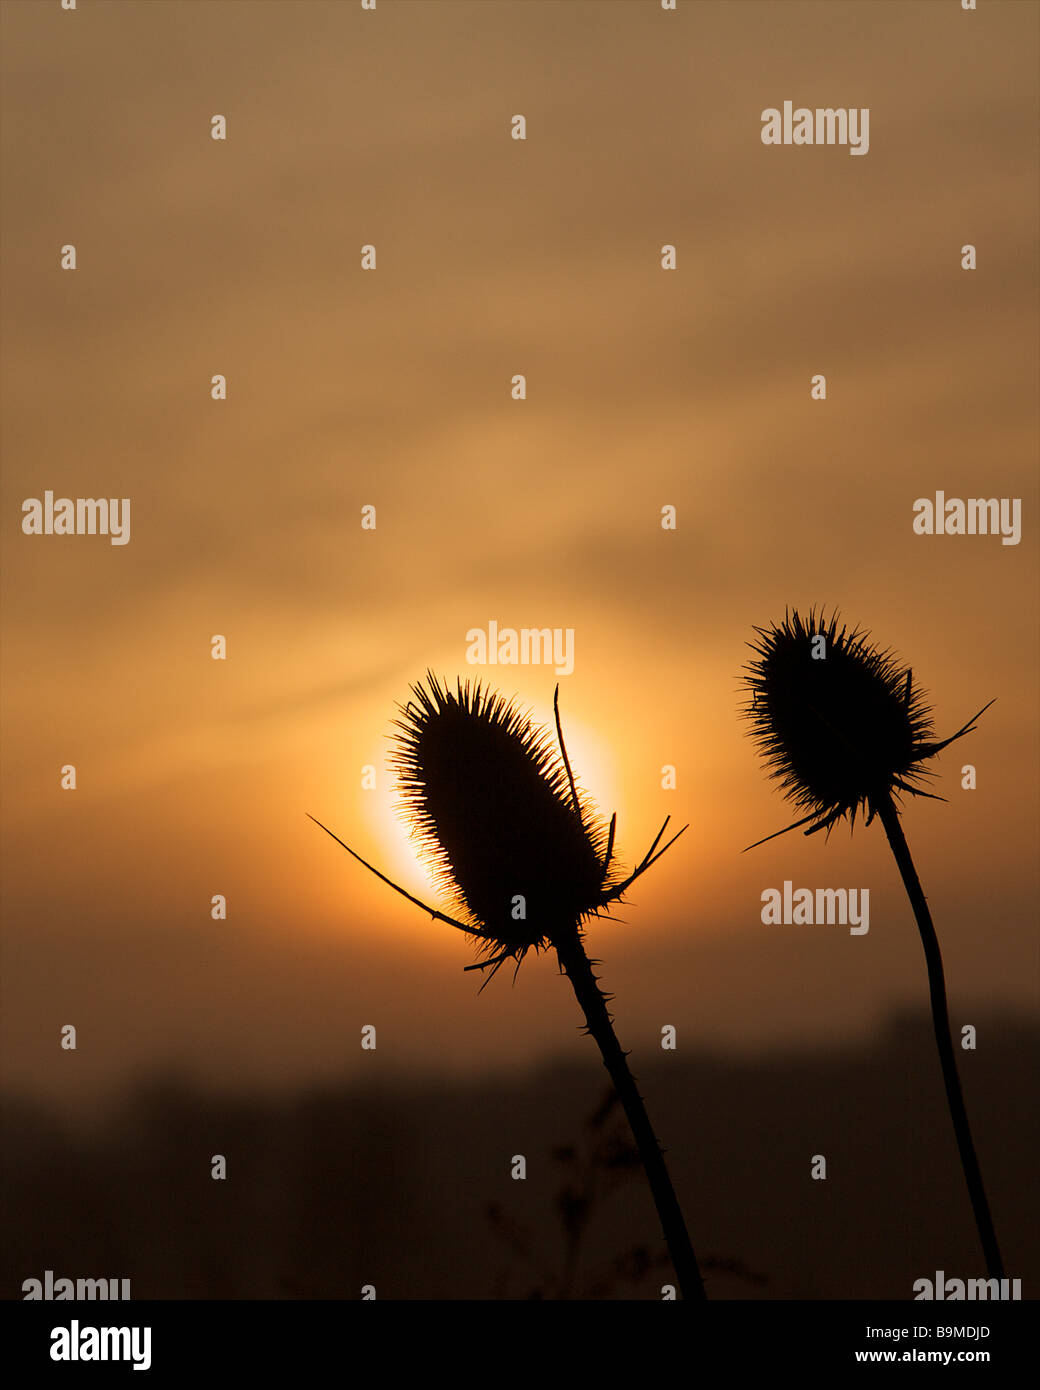 Two plant stalks basking in the sun as it rises behind them Stock Photo